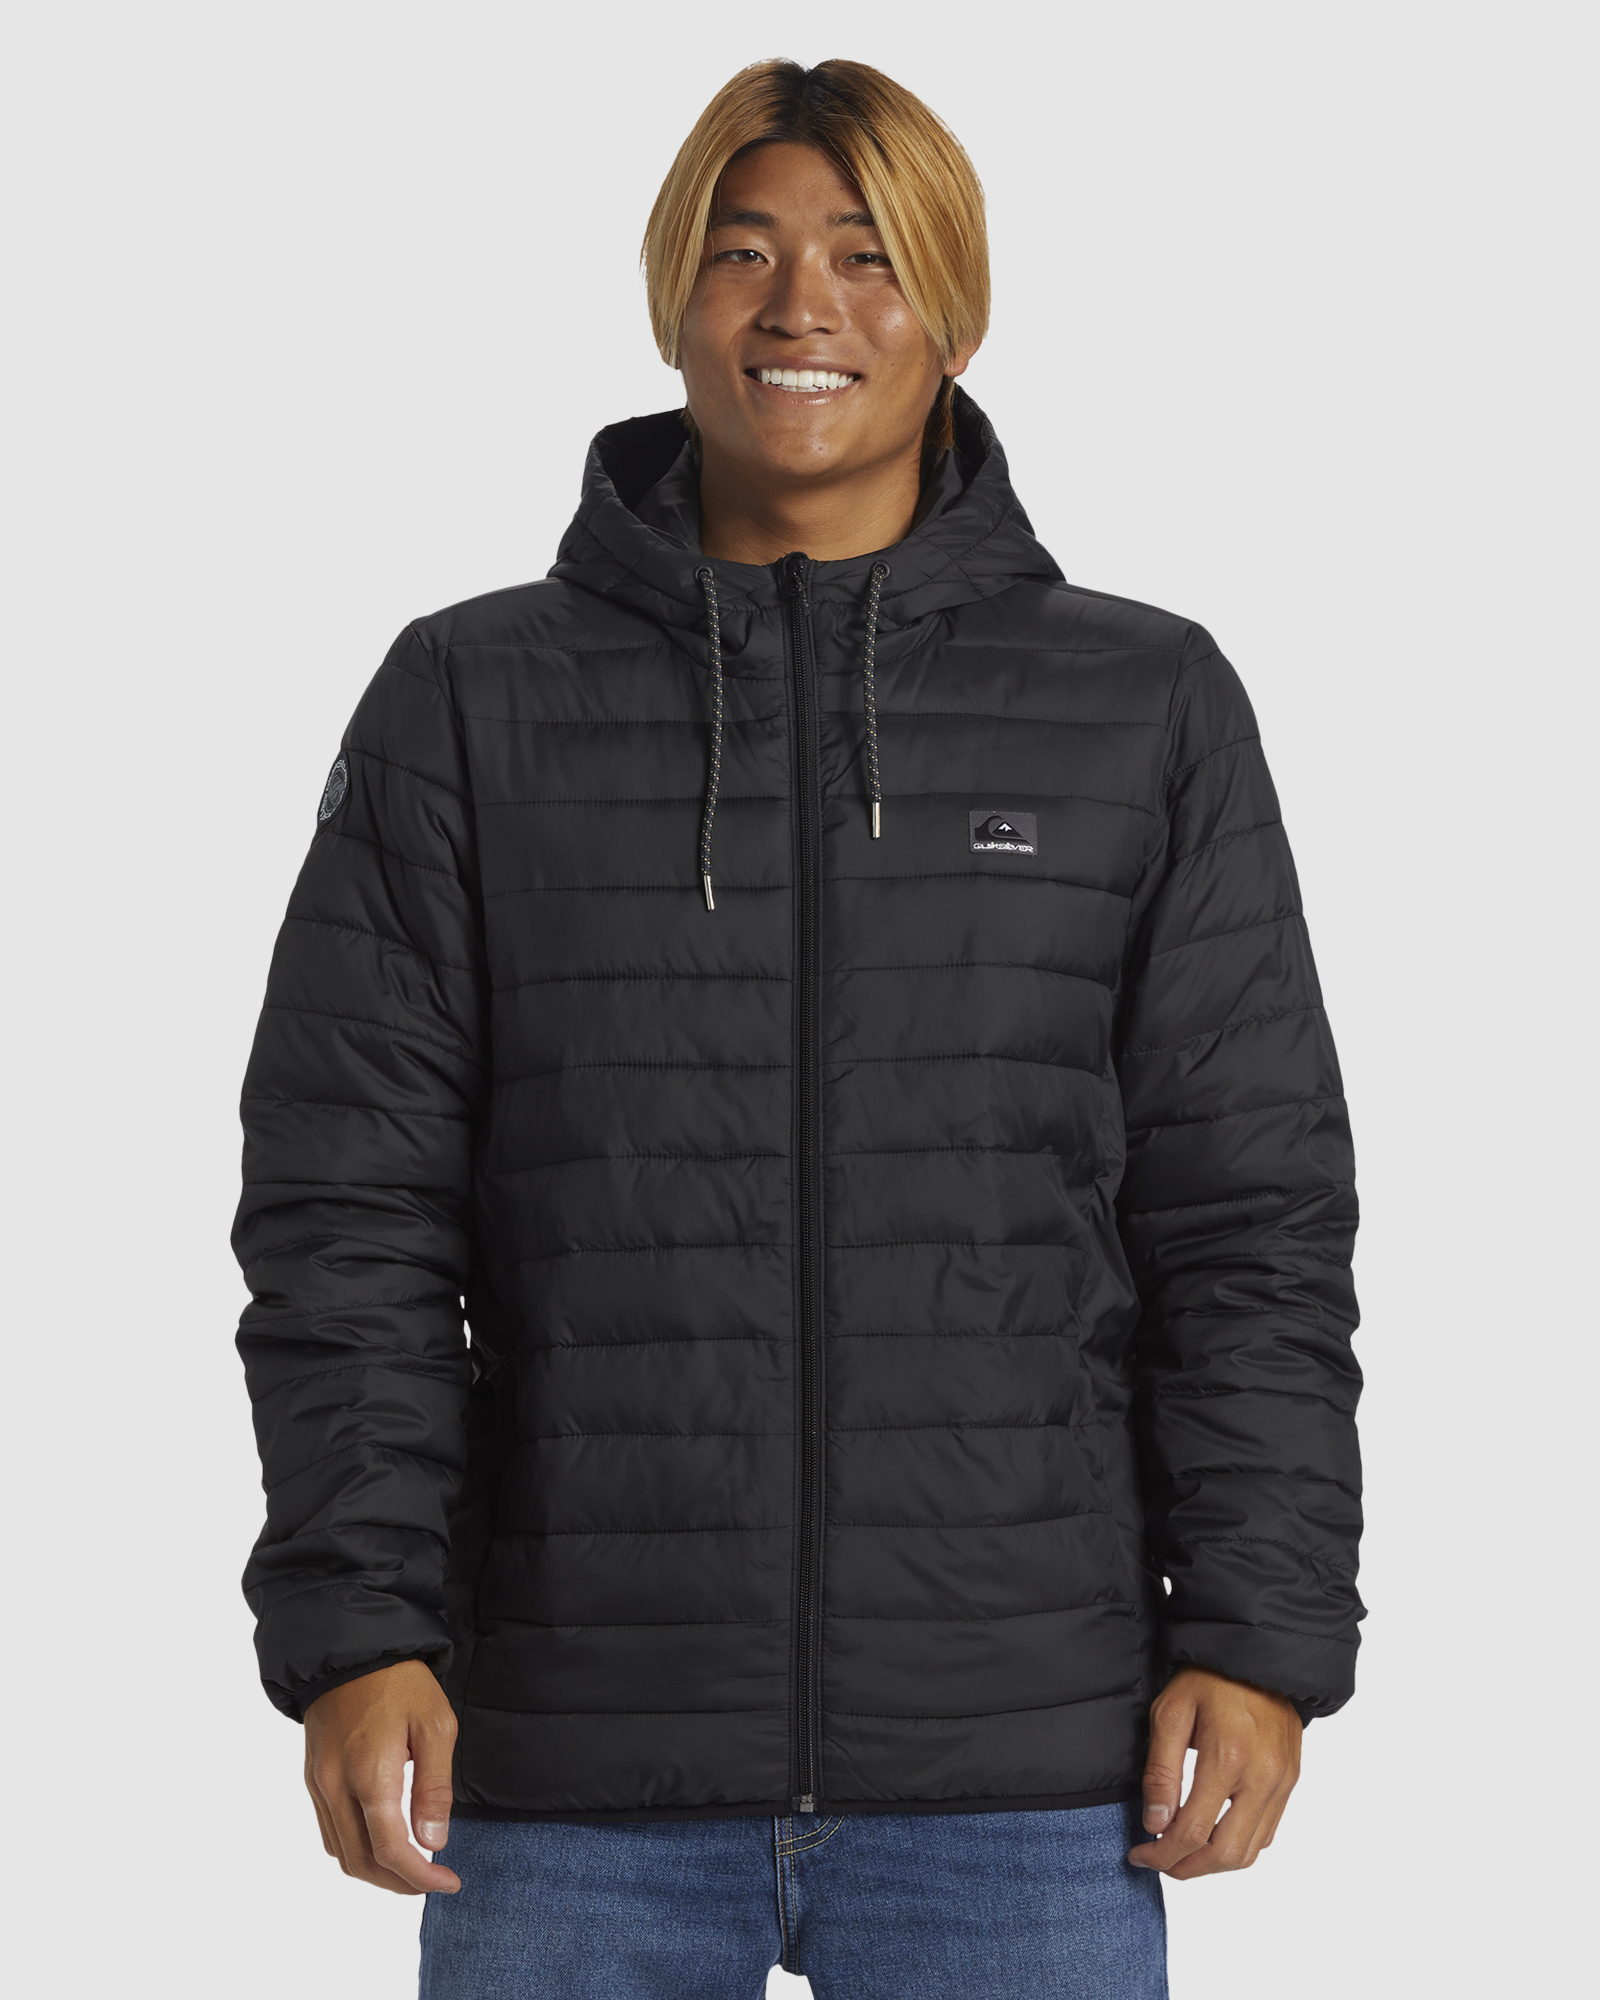 Quiksilver Mens Scaly Puffer Jacket - Black | SurfStitch